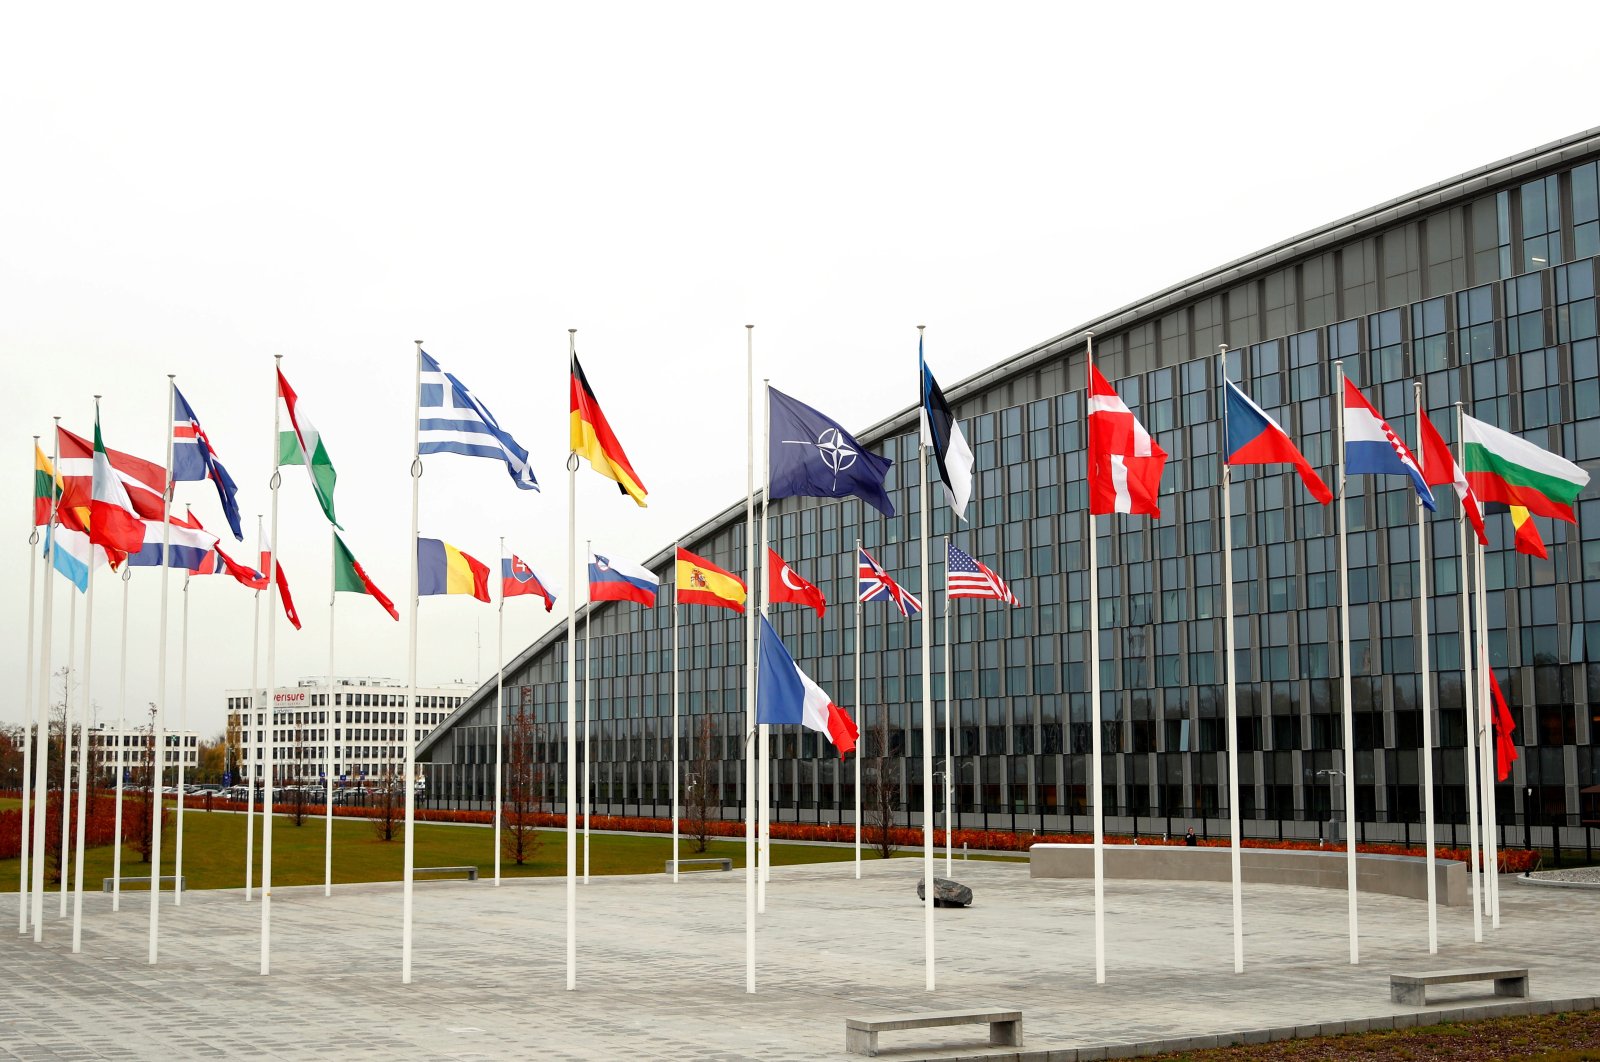 Flags of NATO member countries are seen at the Alliance headquarters in Brussels, Belgium, Nov. 26, 2019. (REUTERS Photo)